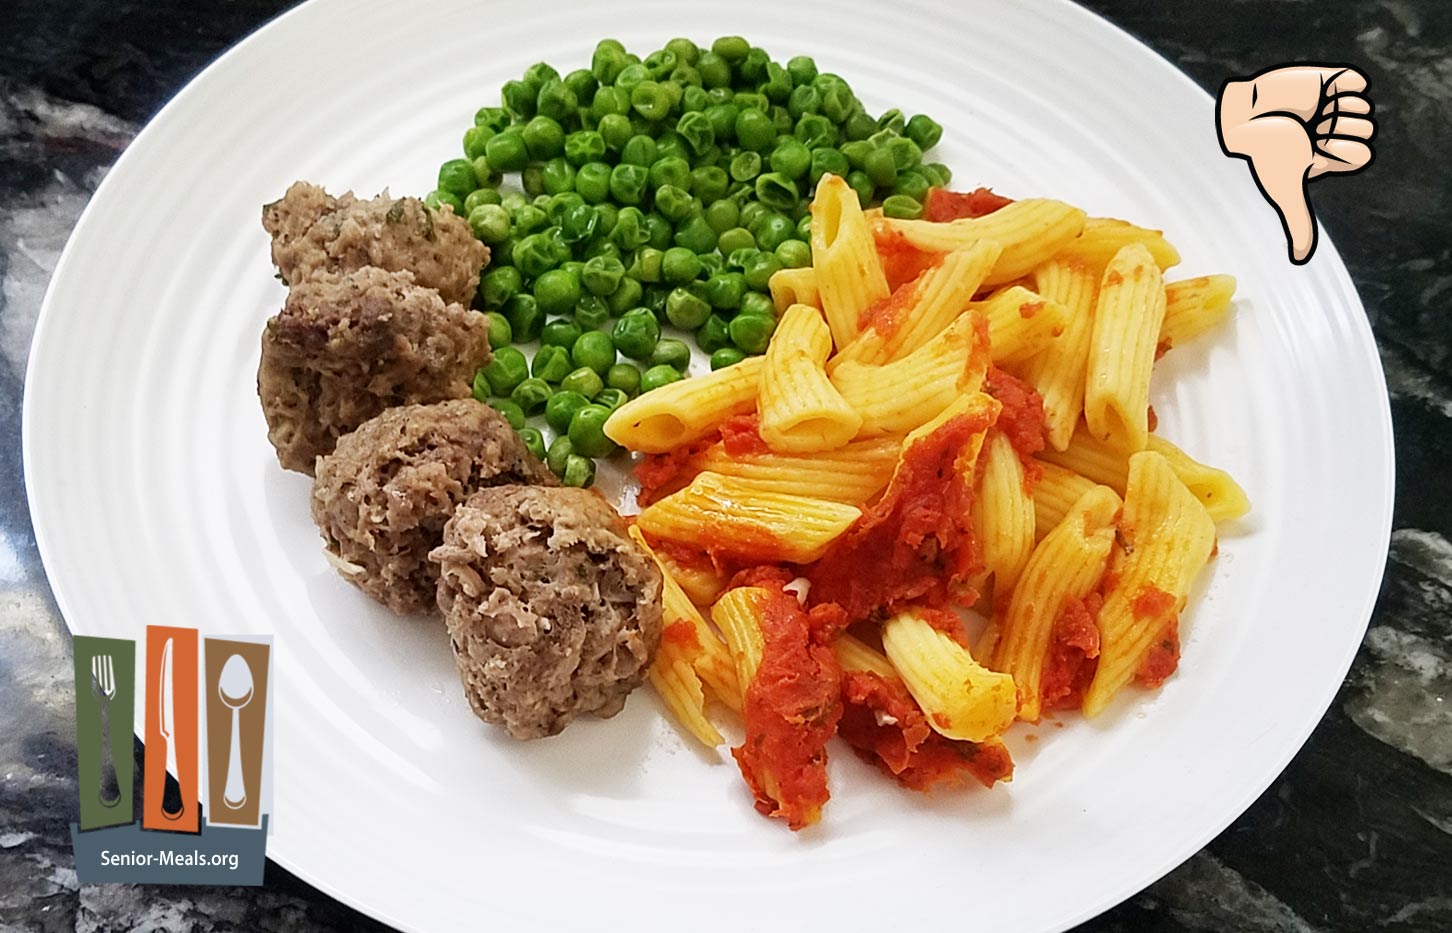 MK Signature Meal Meatballs With Penne Pasta and Peas - $12.50